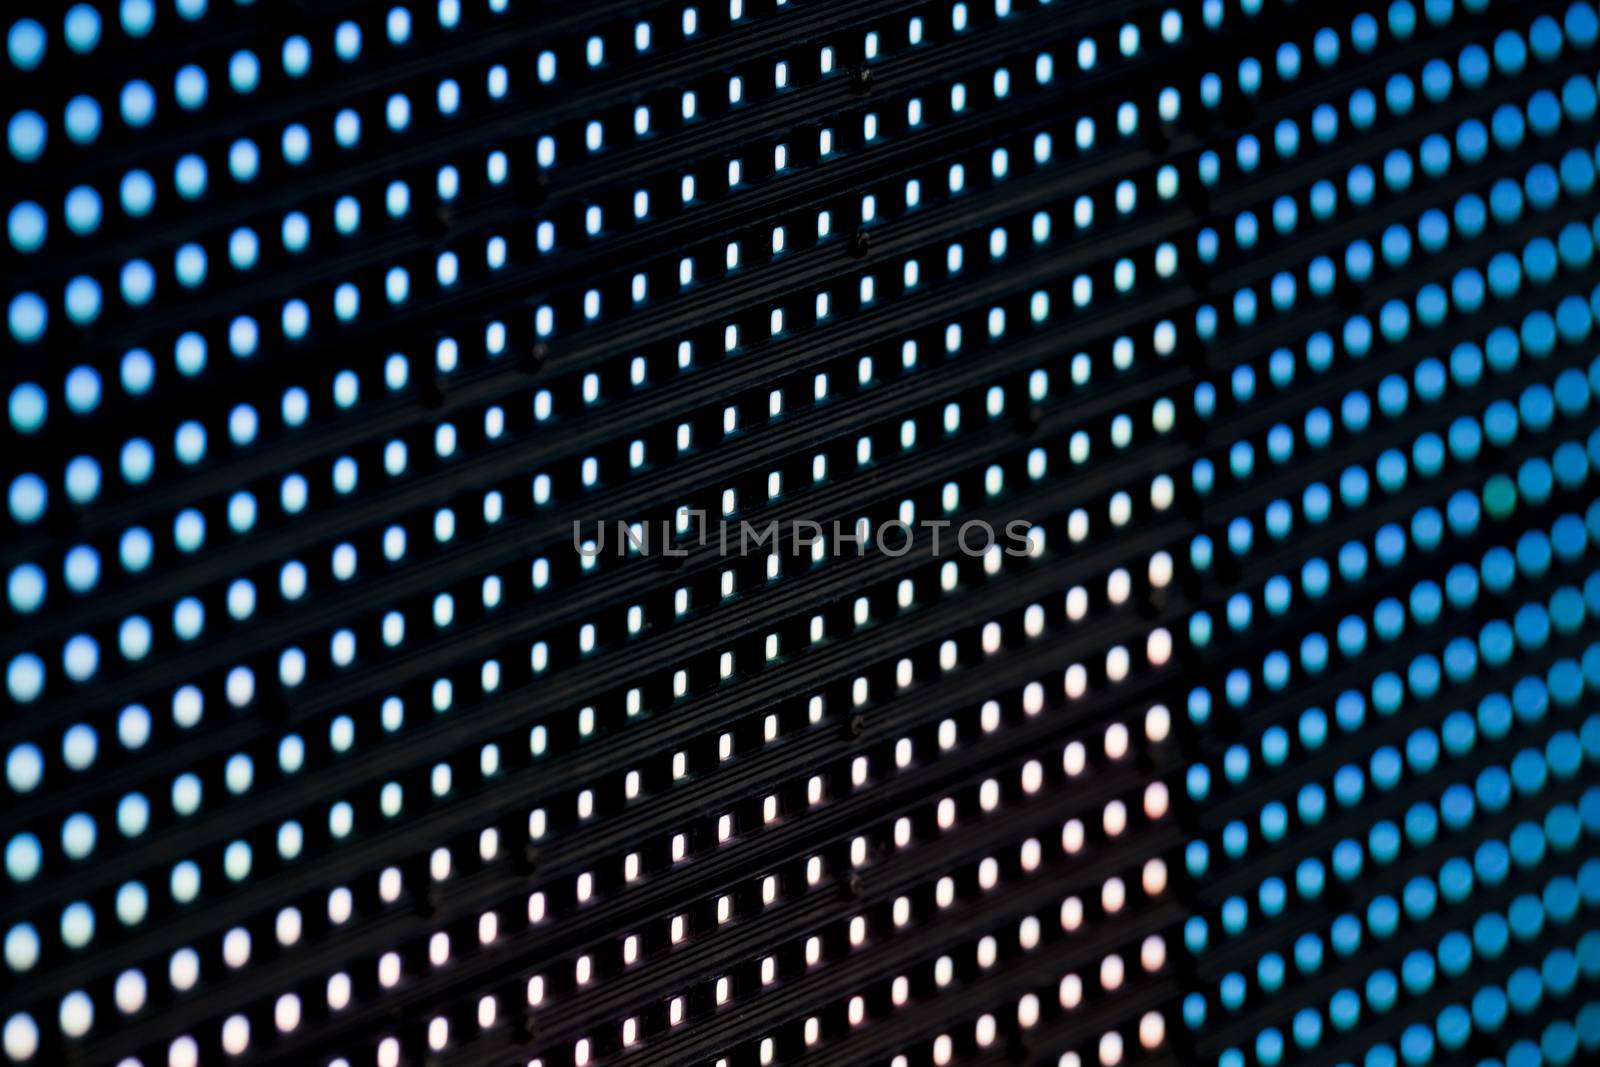 Light emitting diodes for LED display by Portokalis